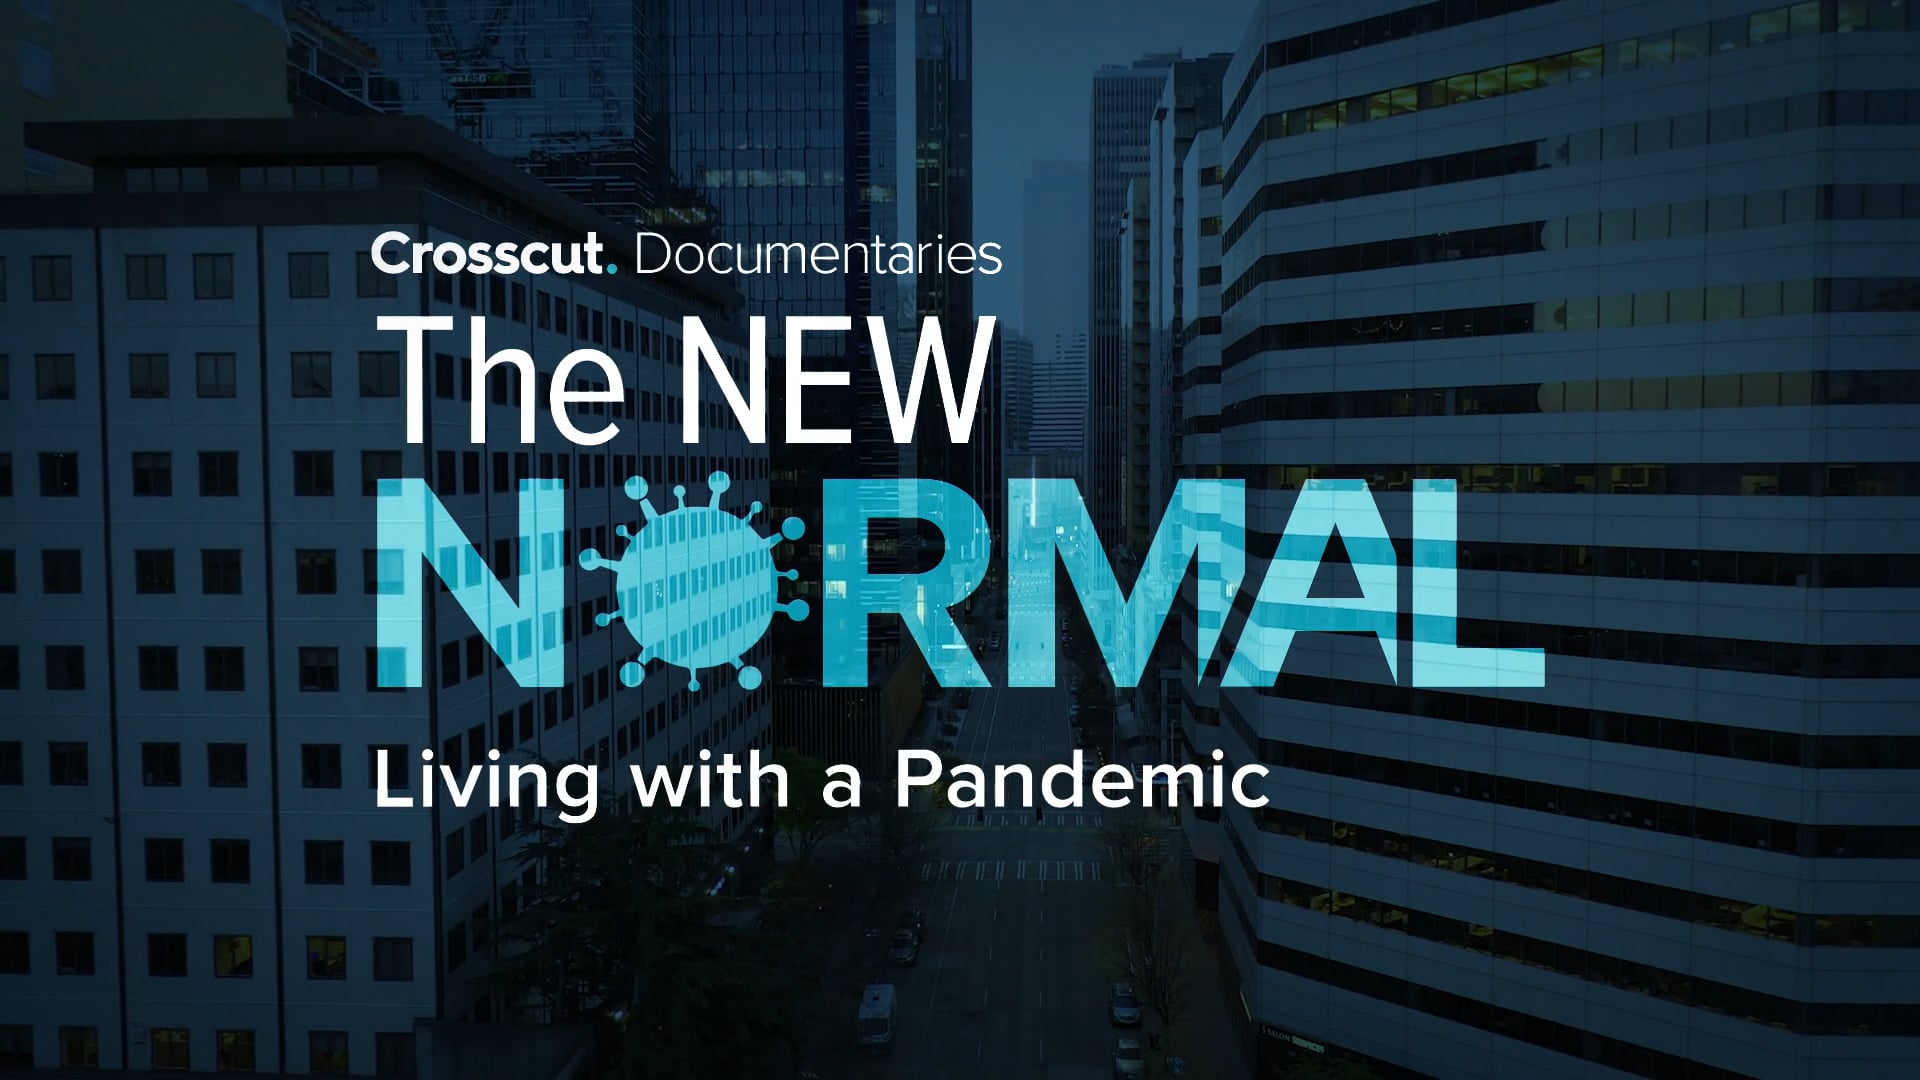 Crosscut Documentaries: Living with a Pandemic